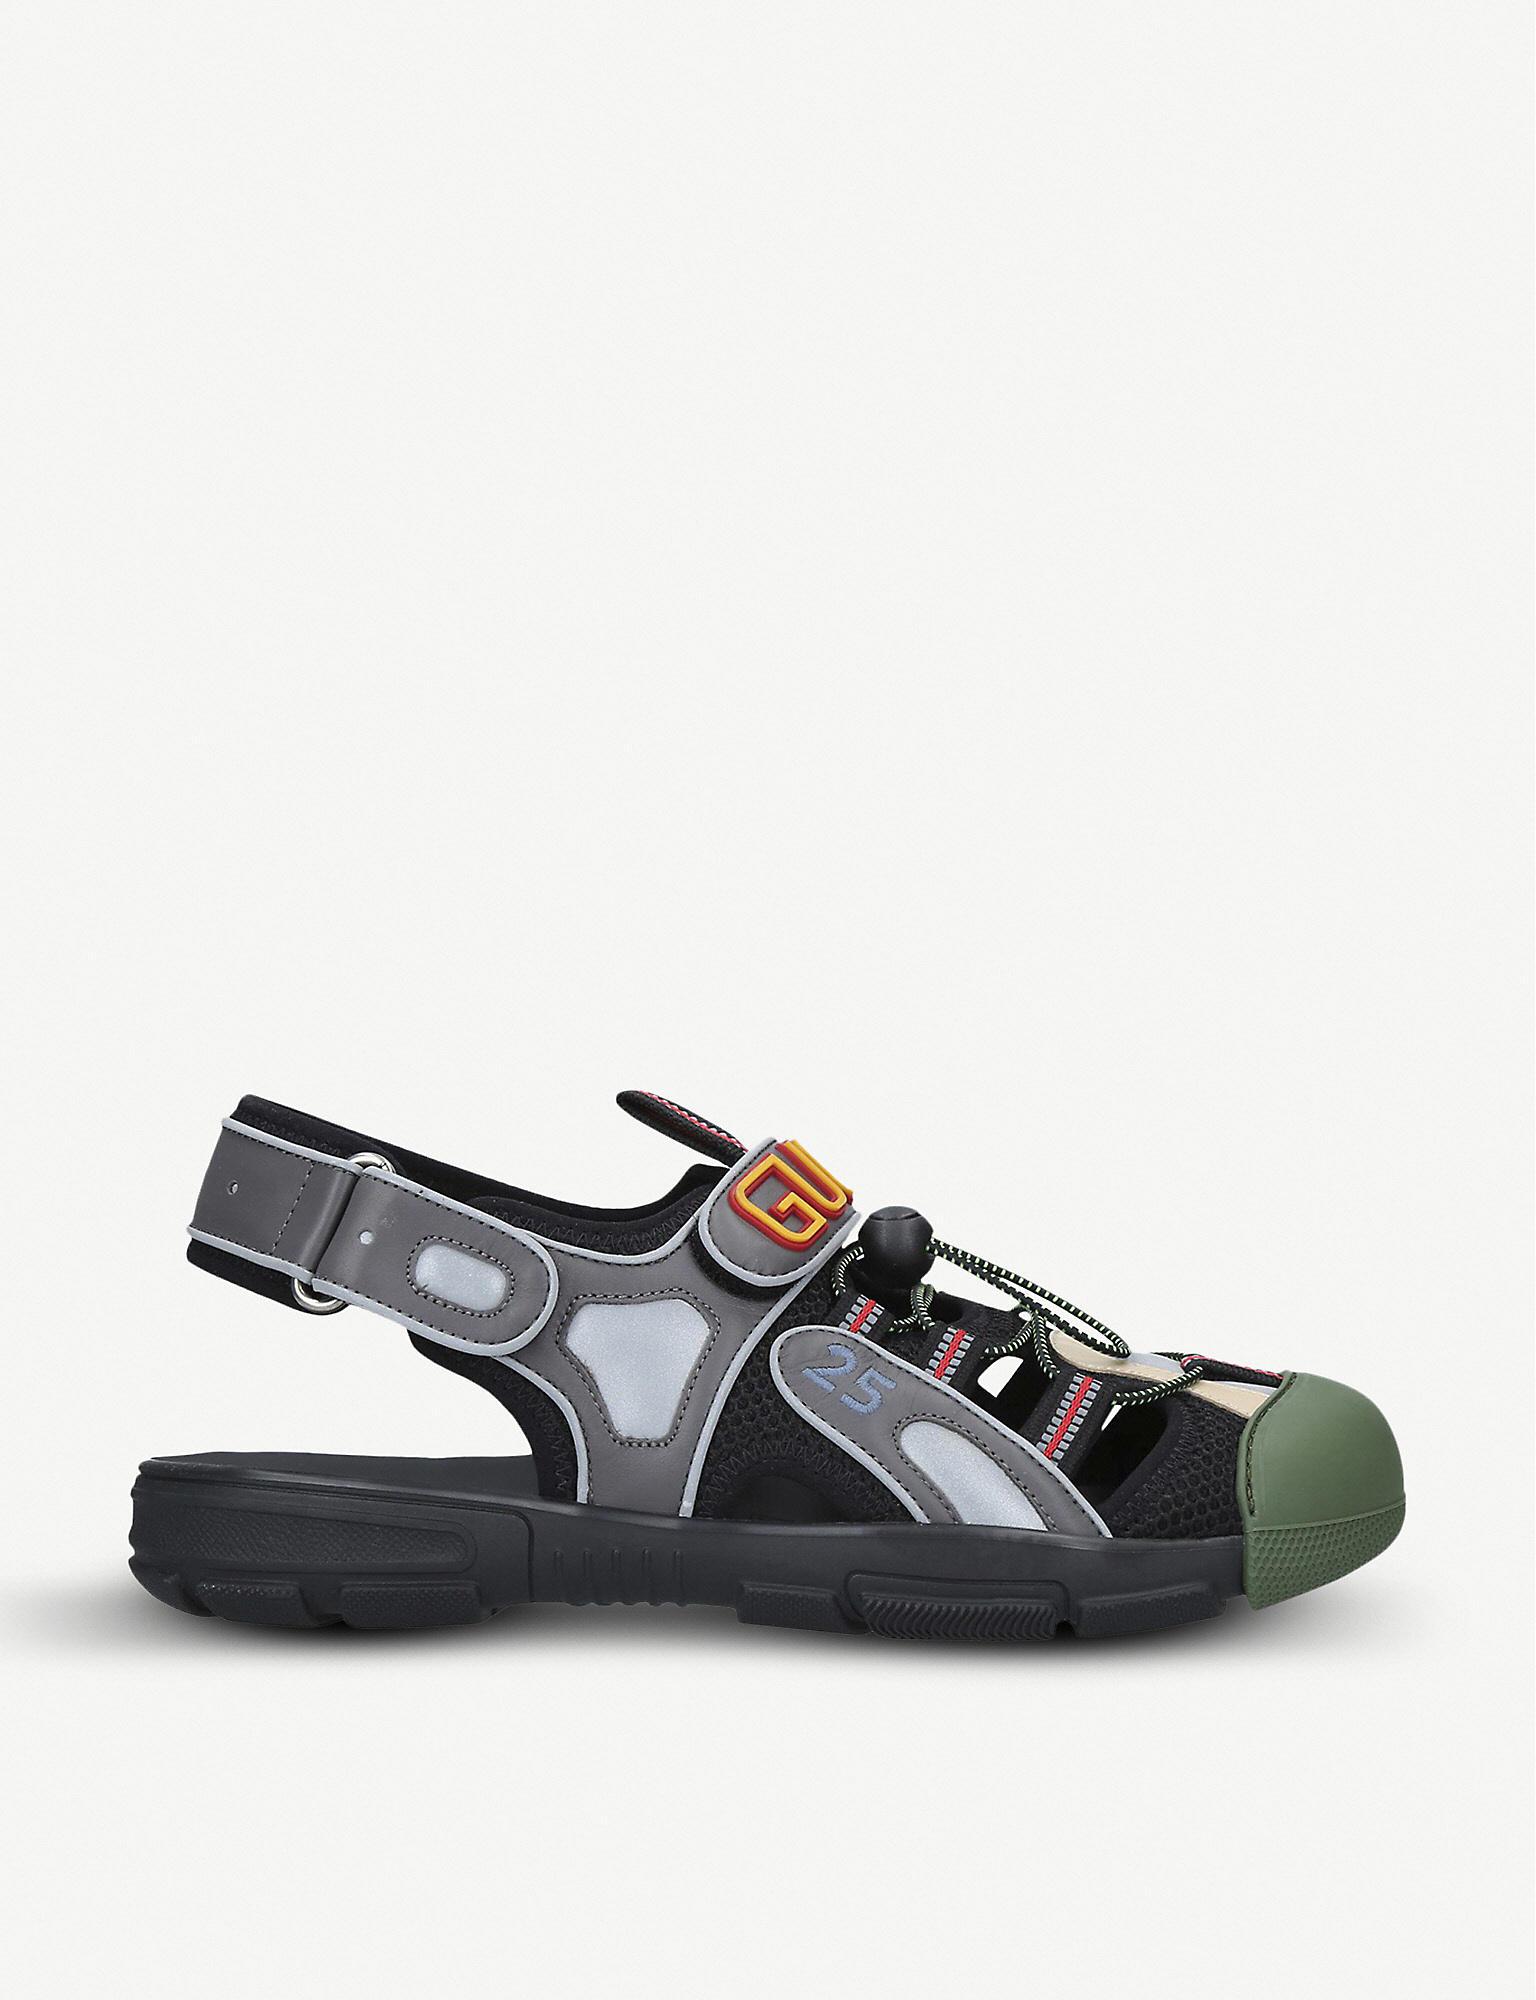 Gucci Tinsel Mesh And Leather Sandals in Black for Men - Lyst